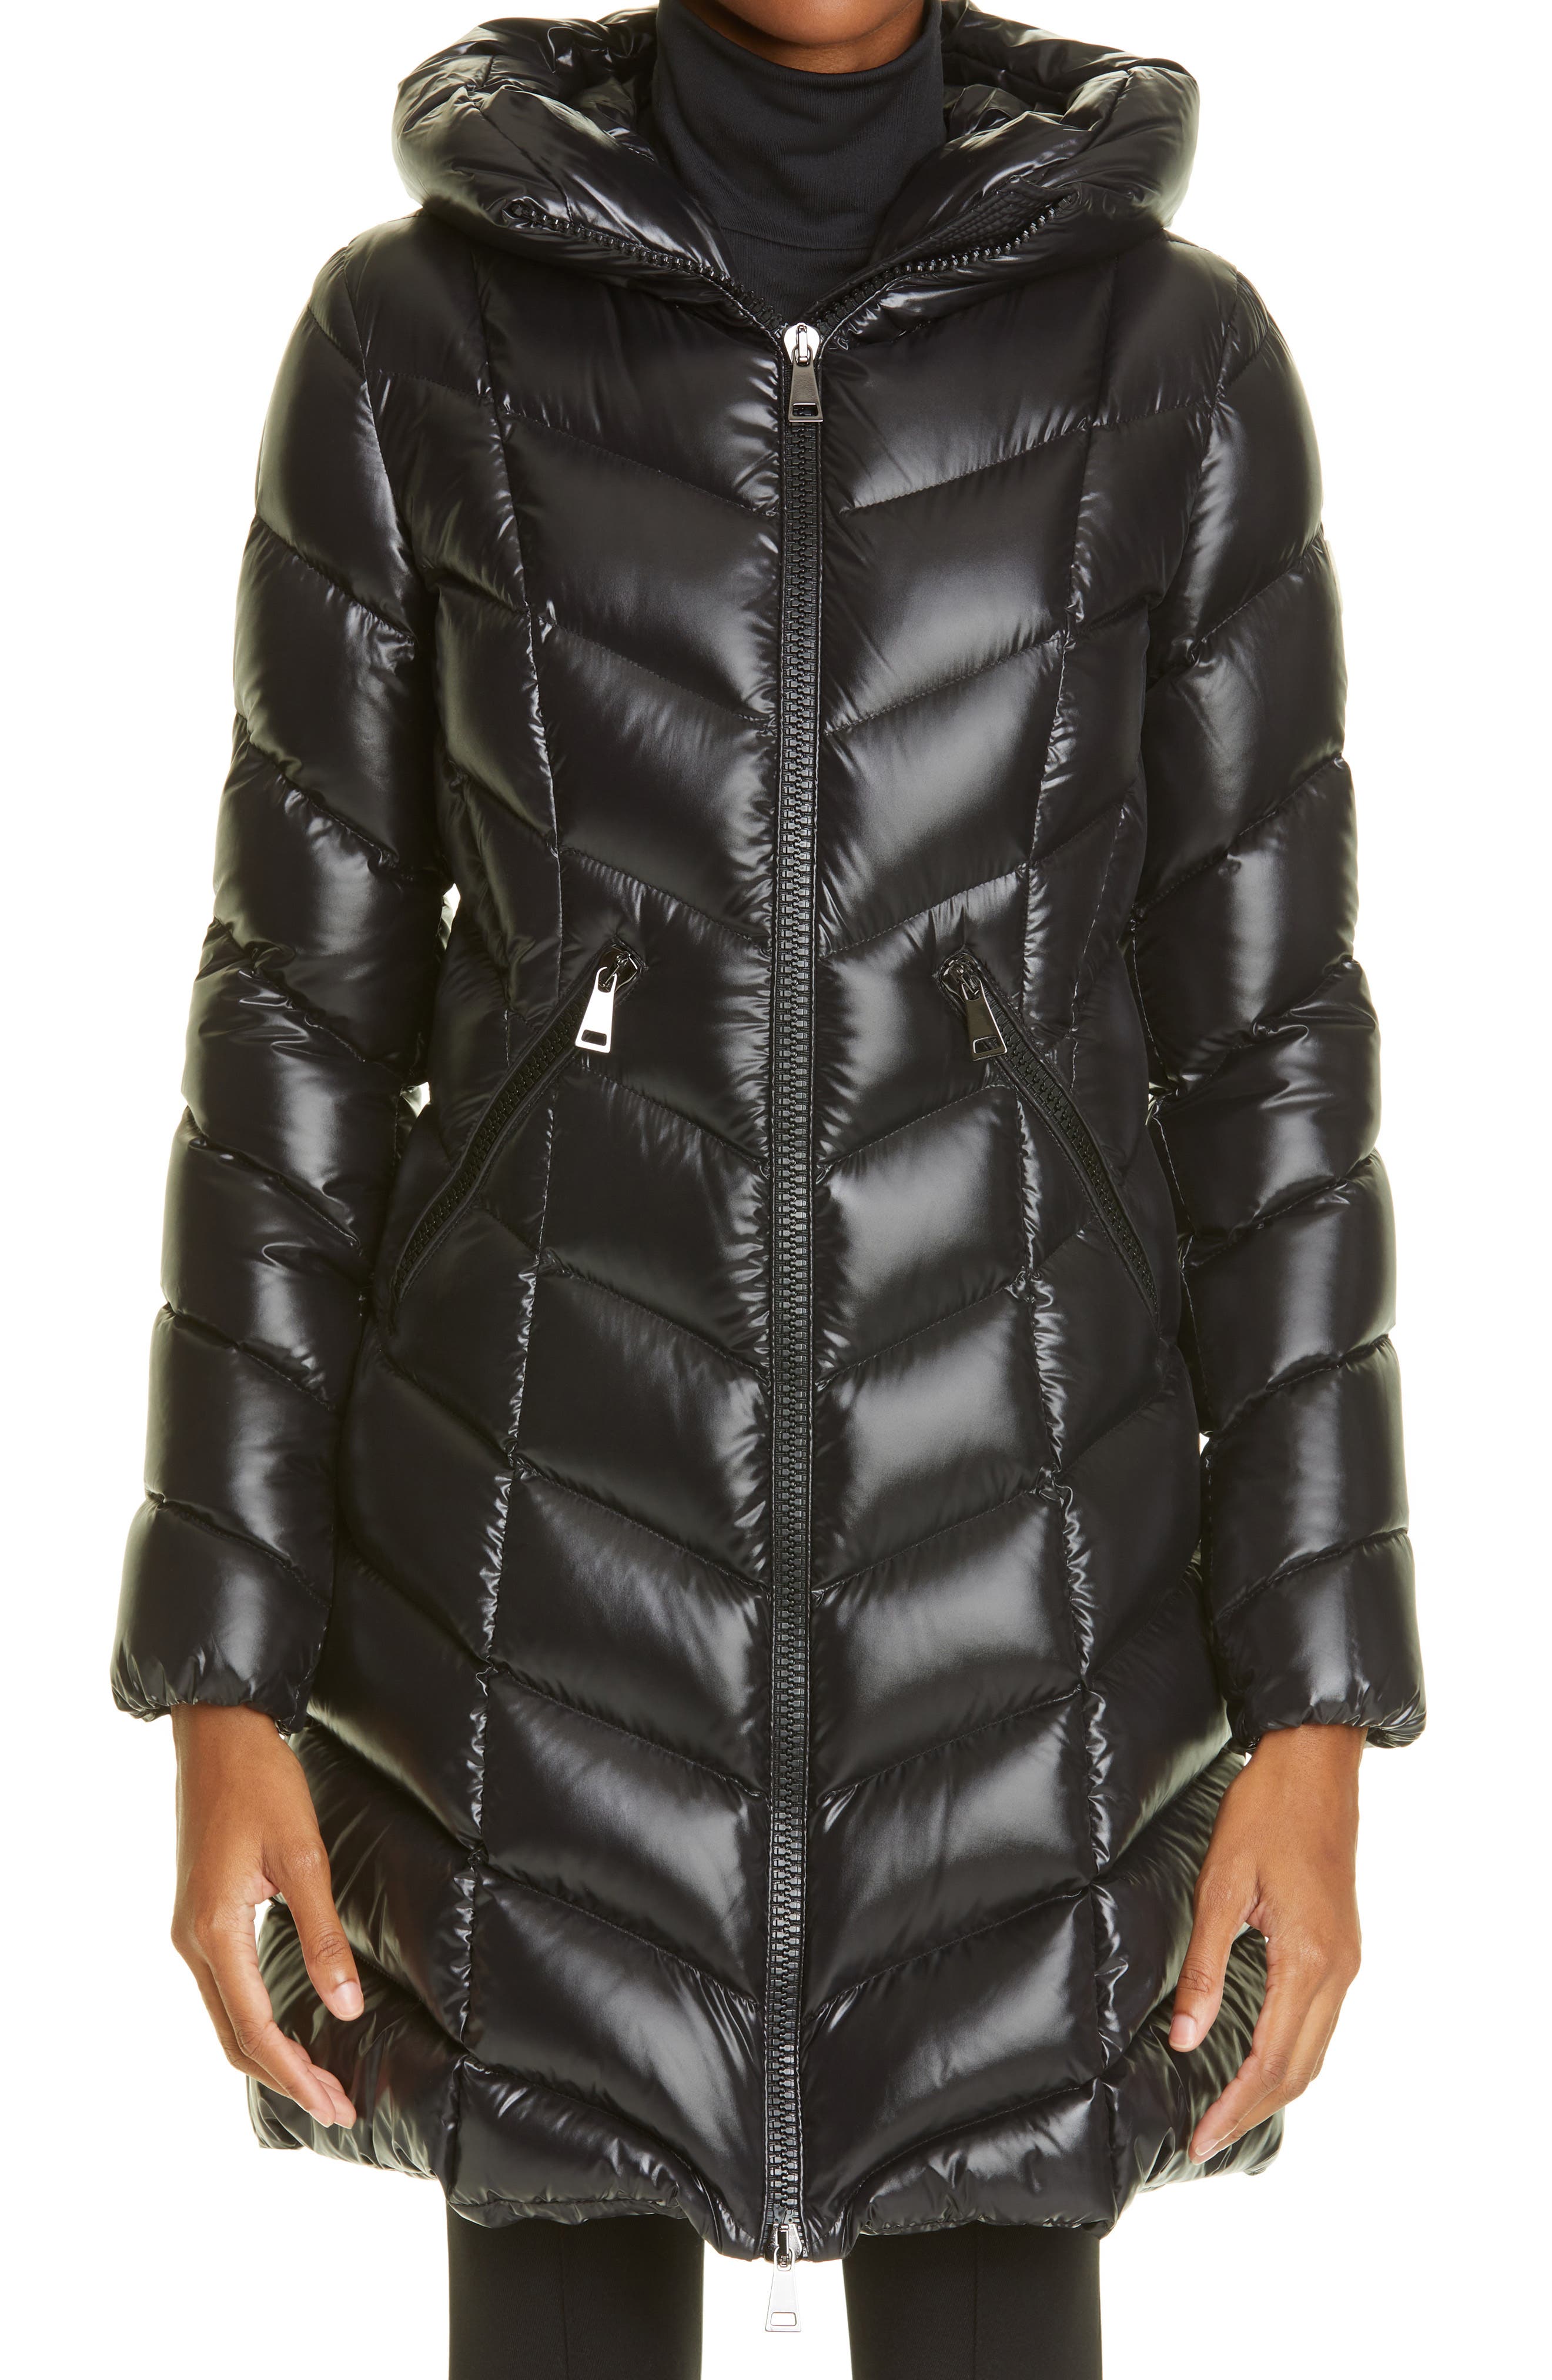 Moncler Marus Quilted 750 Fill Power Down Hooded Puffer Coat in Black at Nordstrom